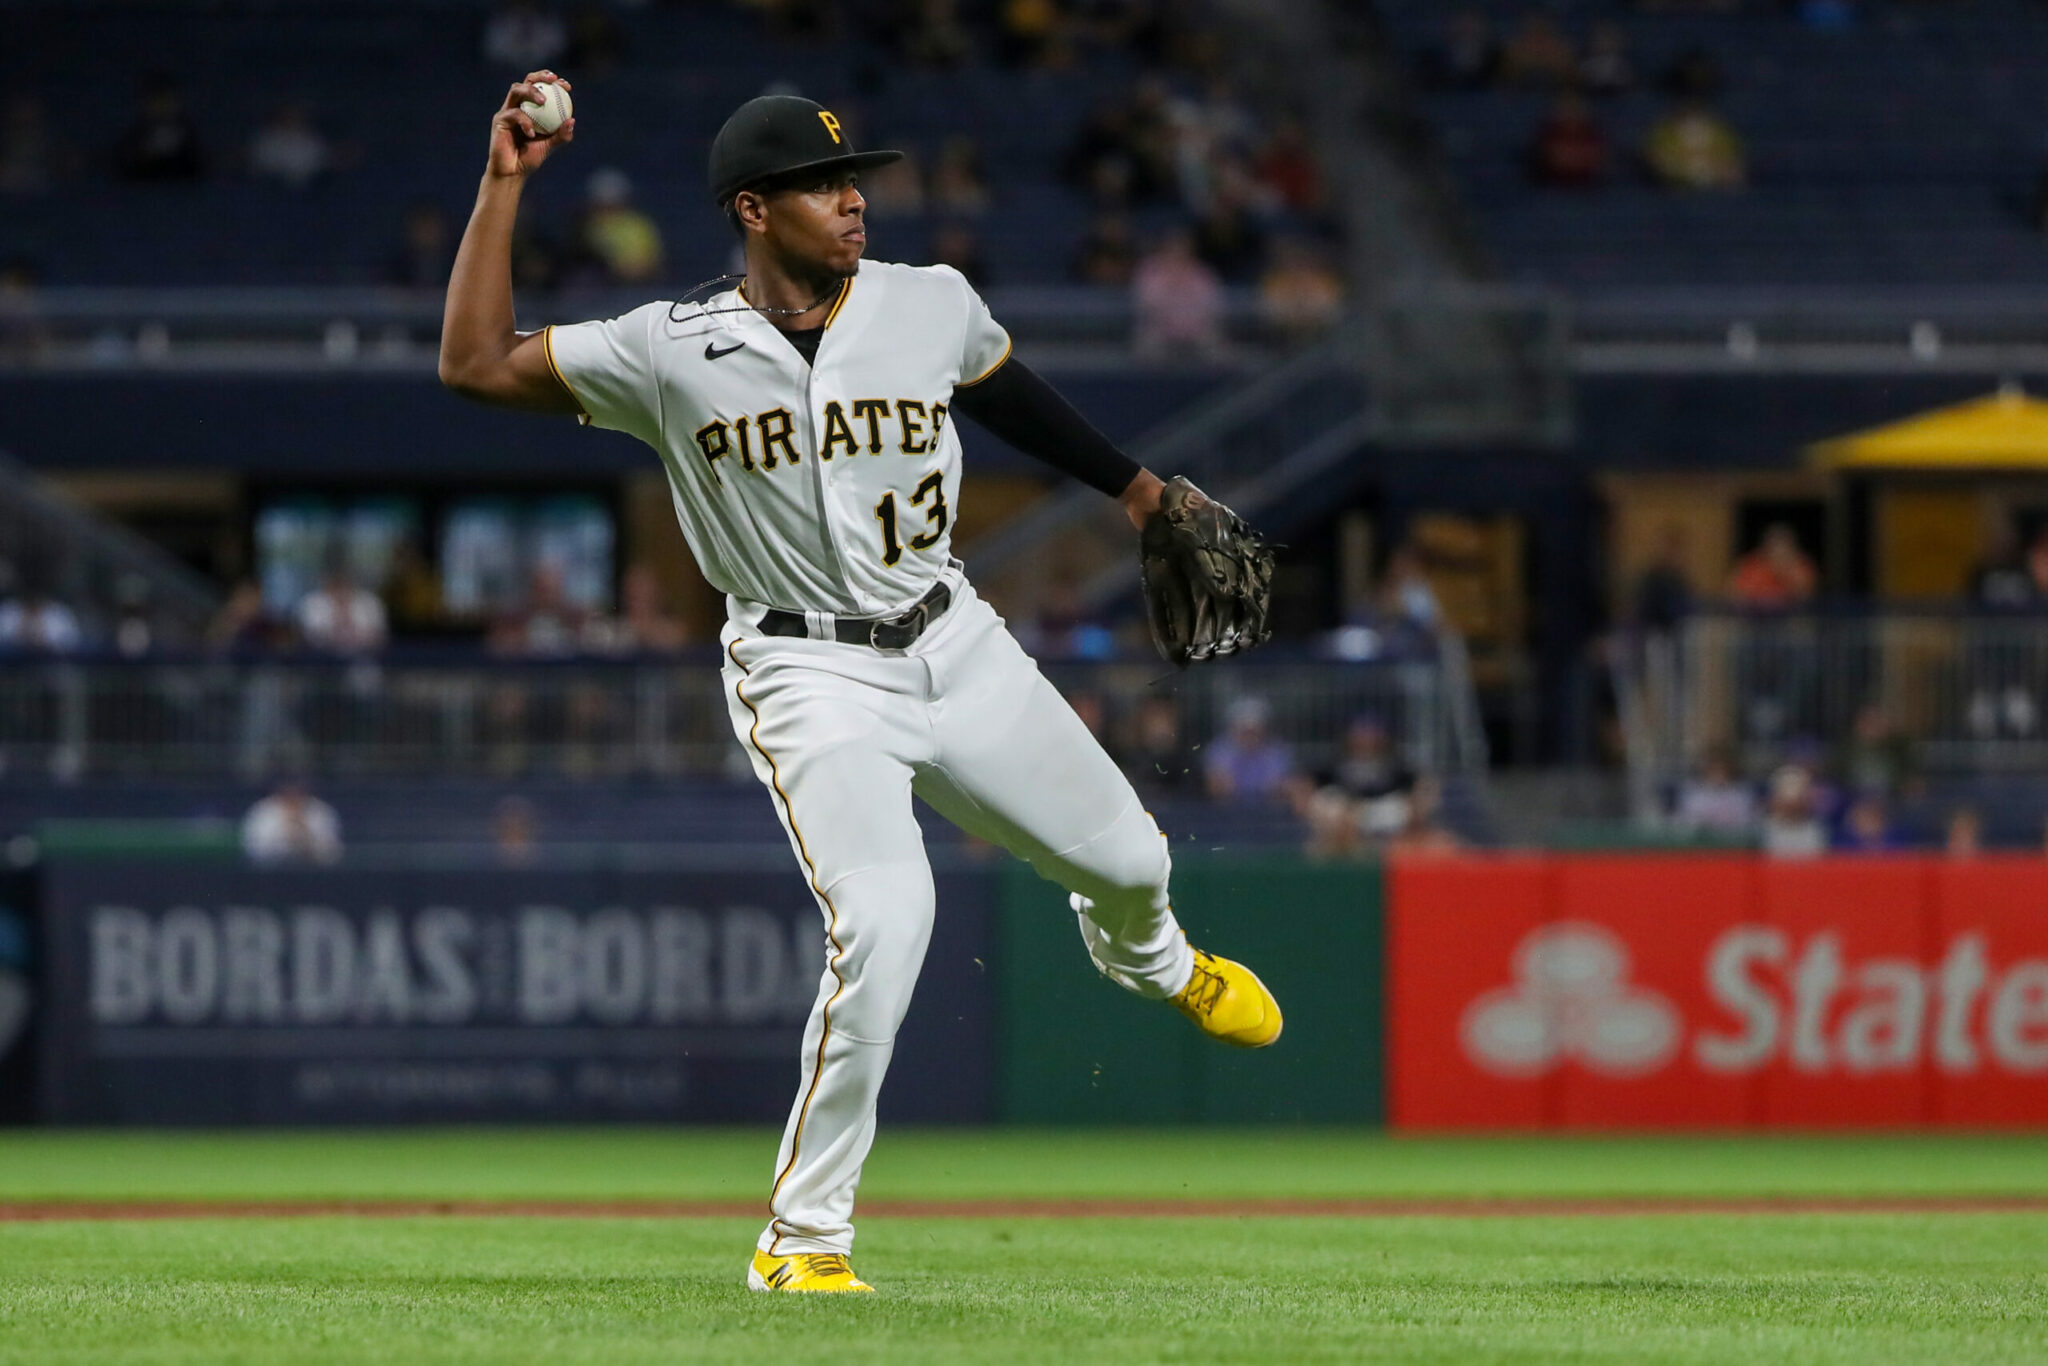 Pirates Prospects Daily: The Pirates Organization Has Strength at Third Base